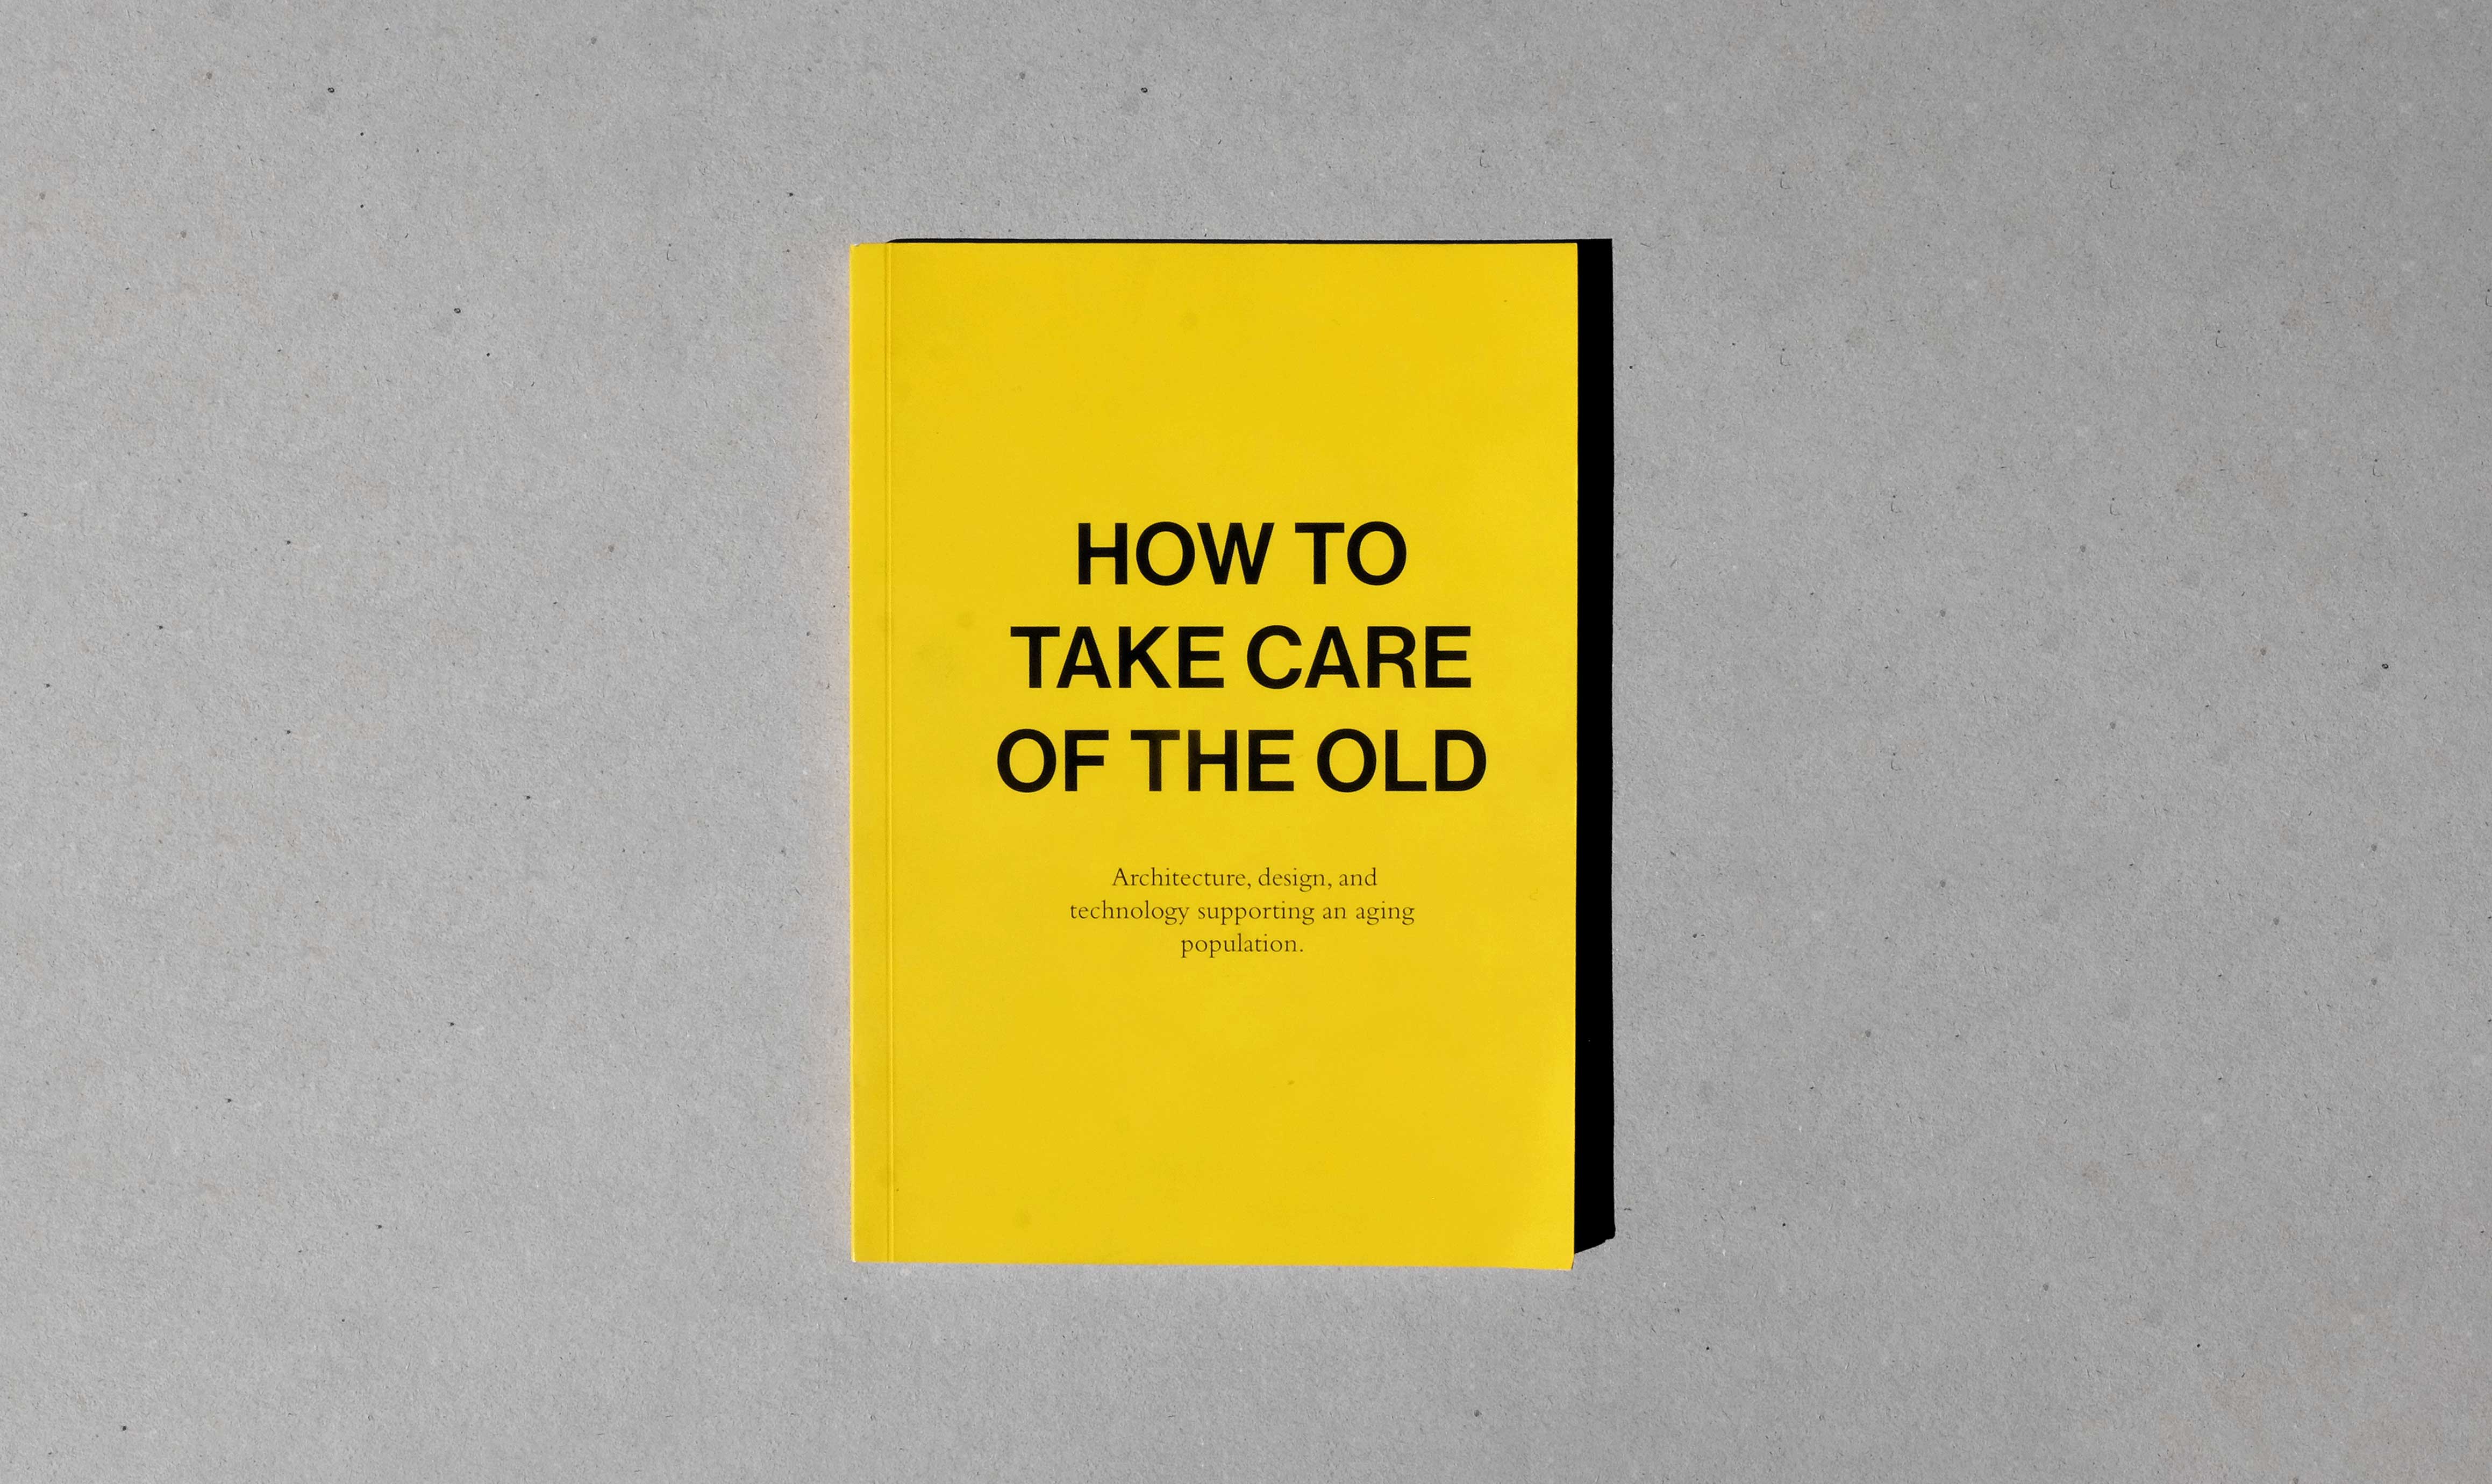 A5 yellow book cover with title "how to take care of the old" and subtitle "Architecture, design and technology supporting an aging population in black on gray textured background.